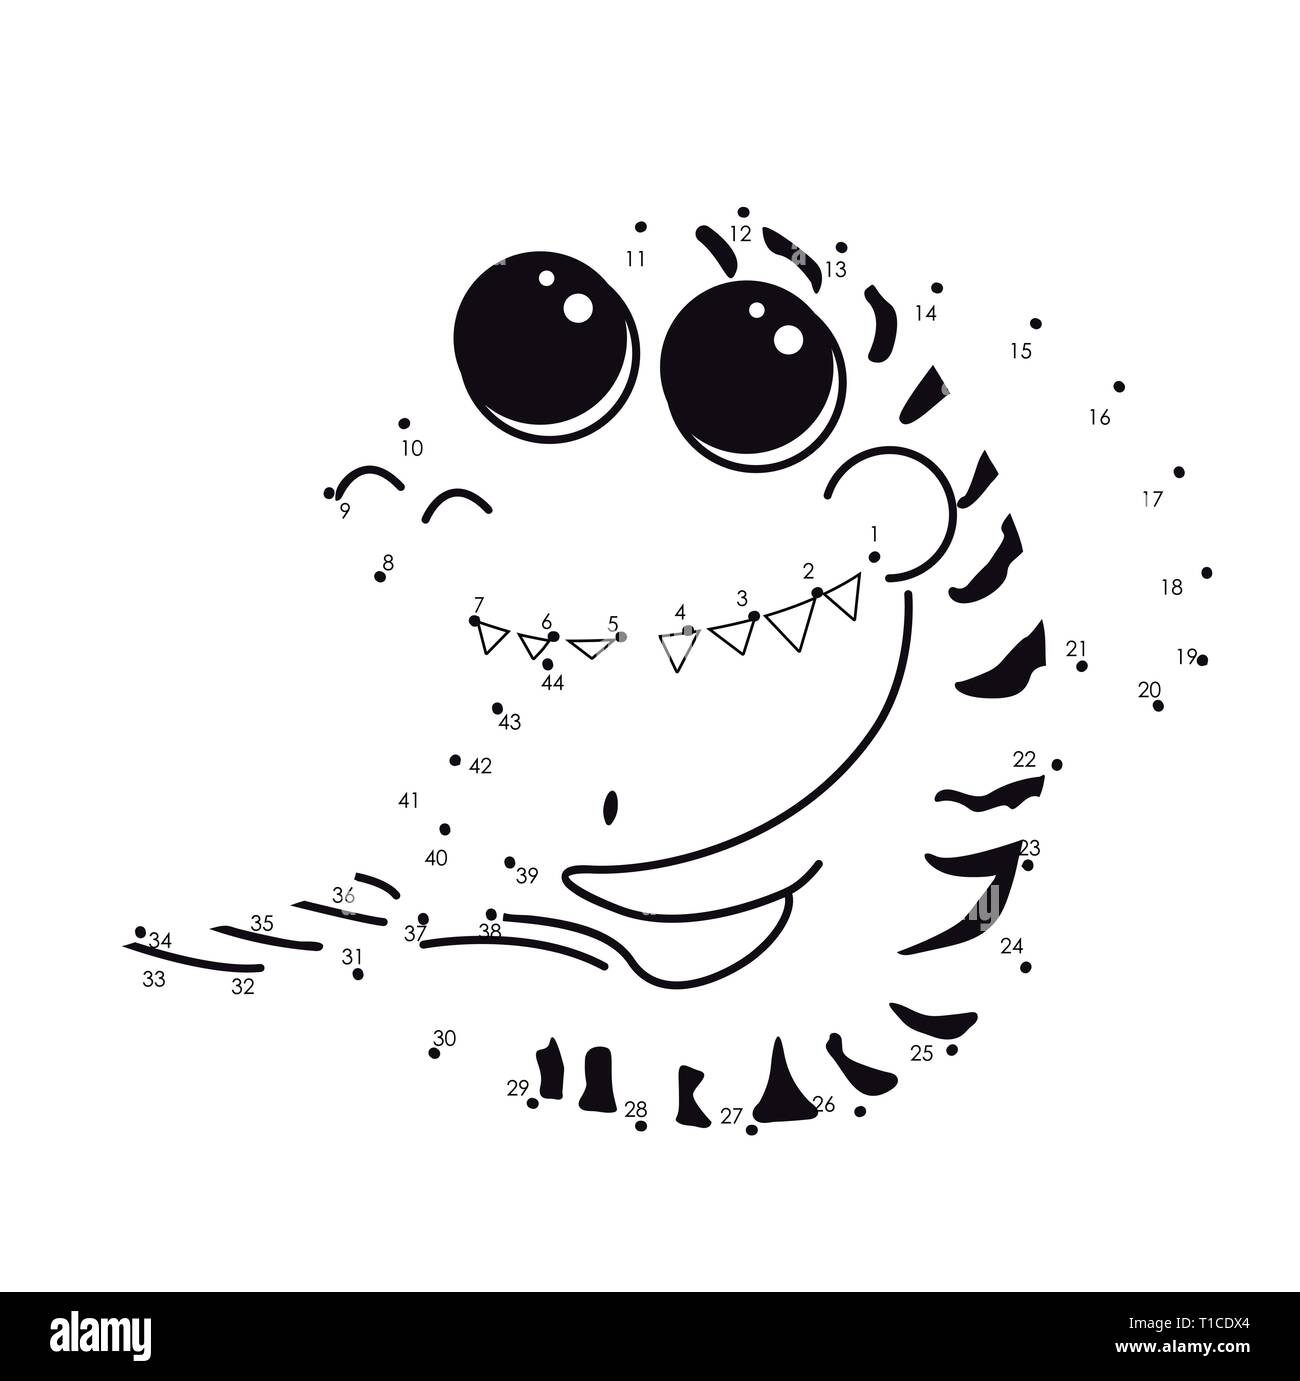 Download Animal Sea Coloring Book Tiger Shark With Big Eyes Vector Connect The Dots For Educational Game Cartoon Funny Isolated Character Illustration With Stock Vector Image Art Alamy